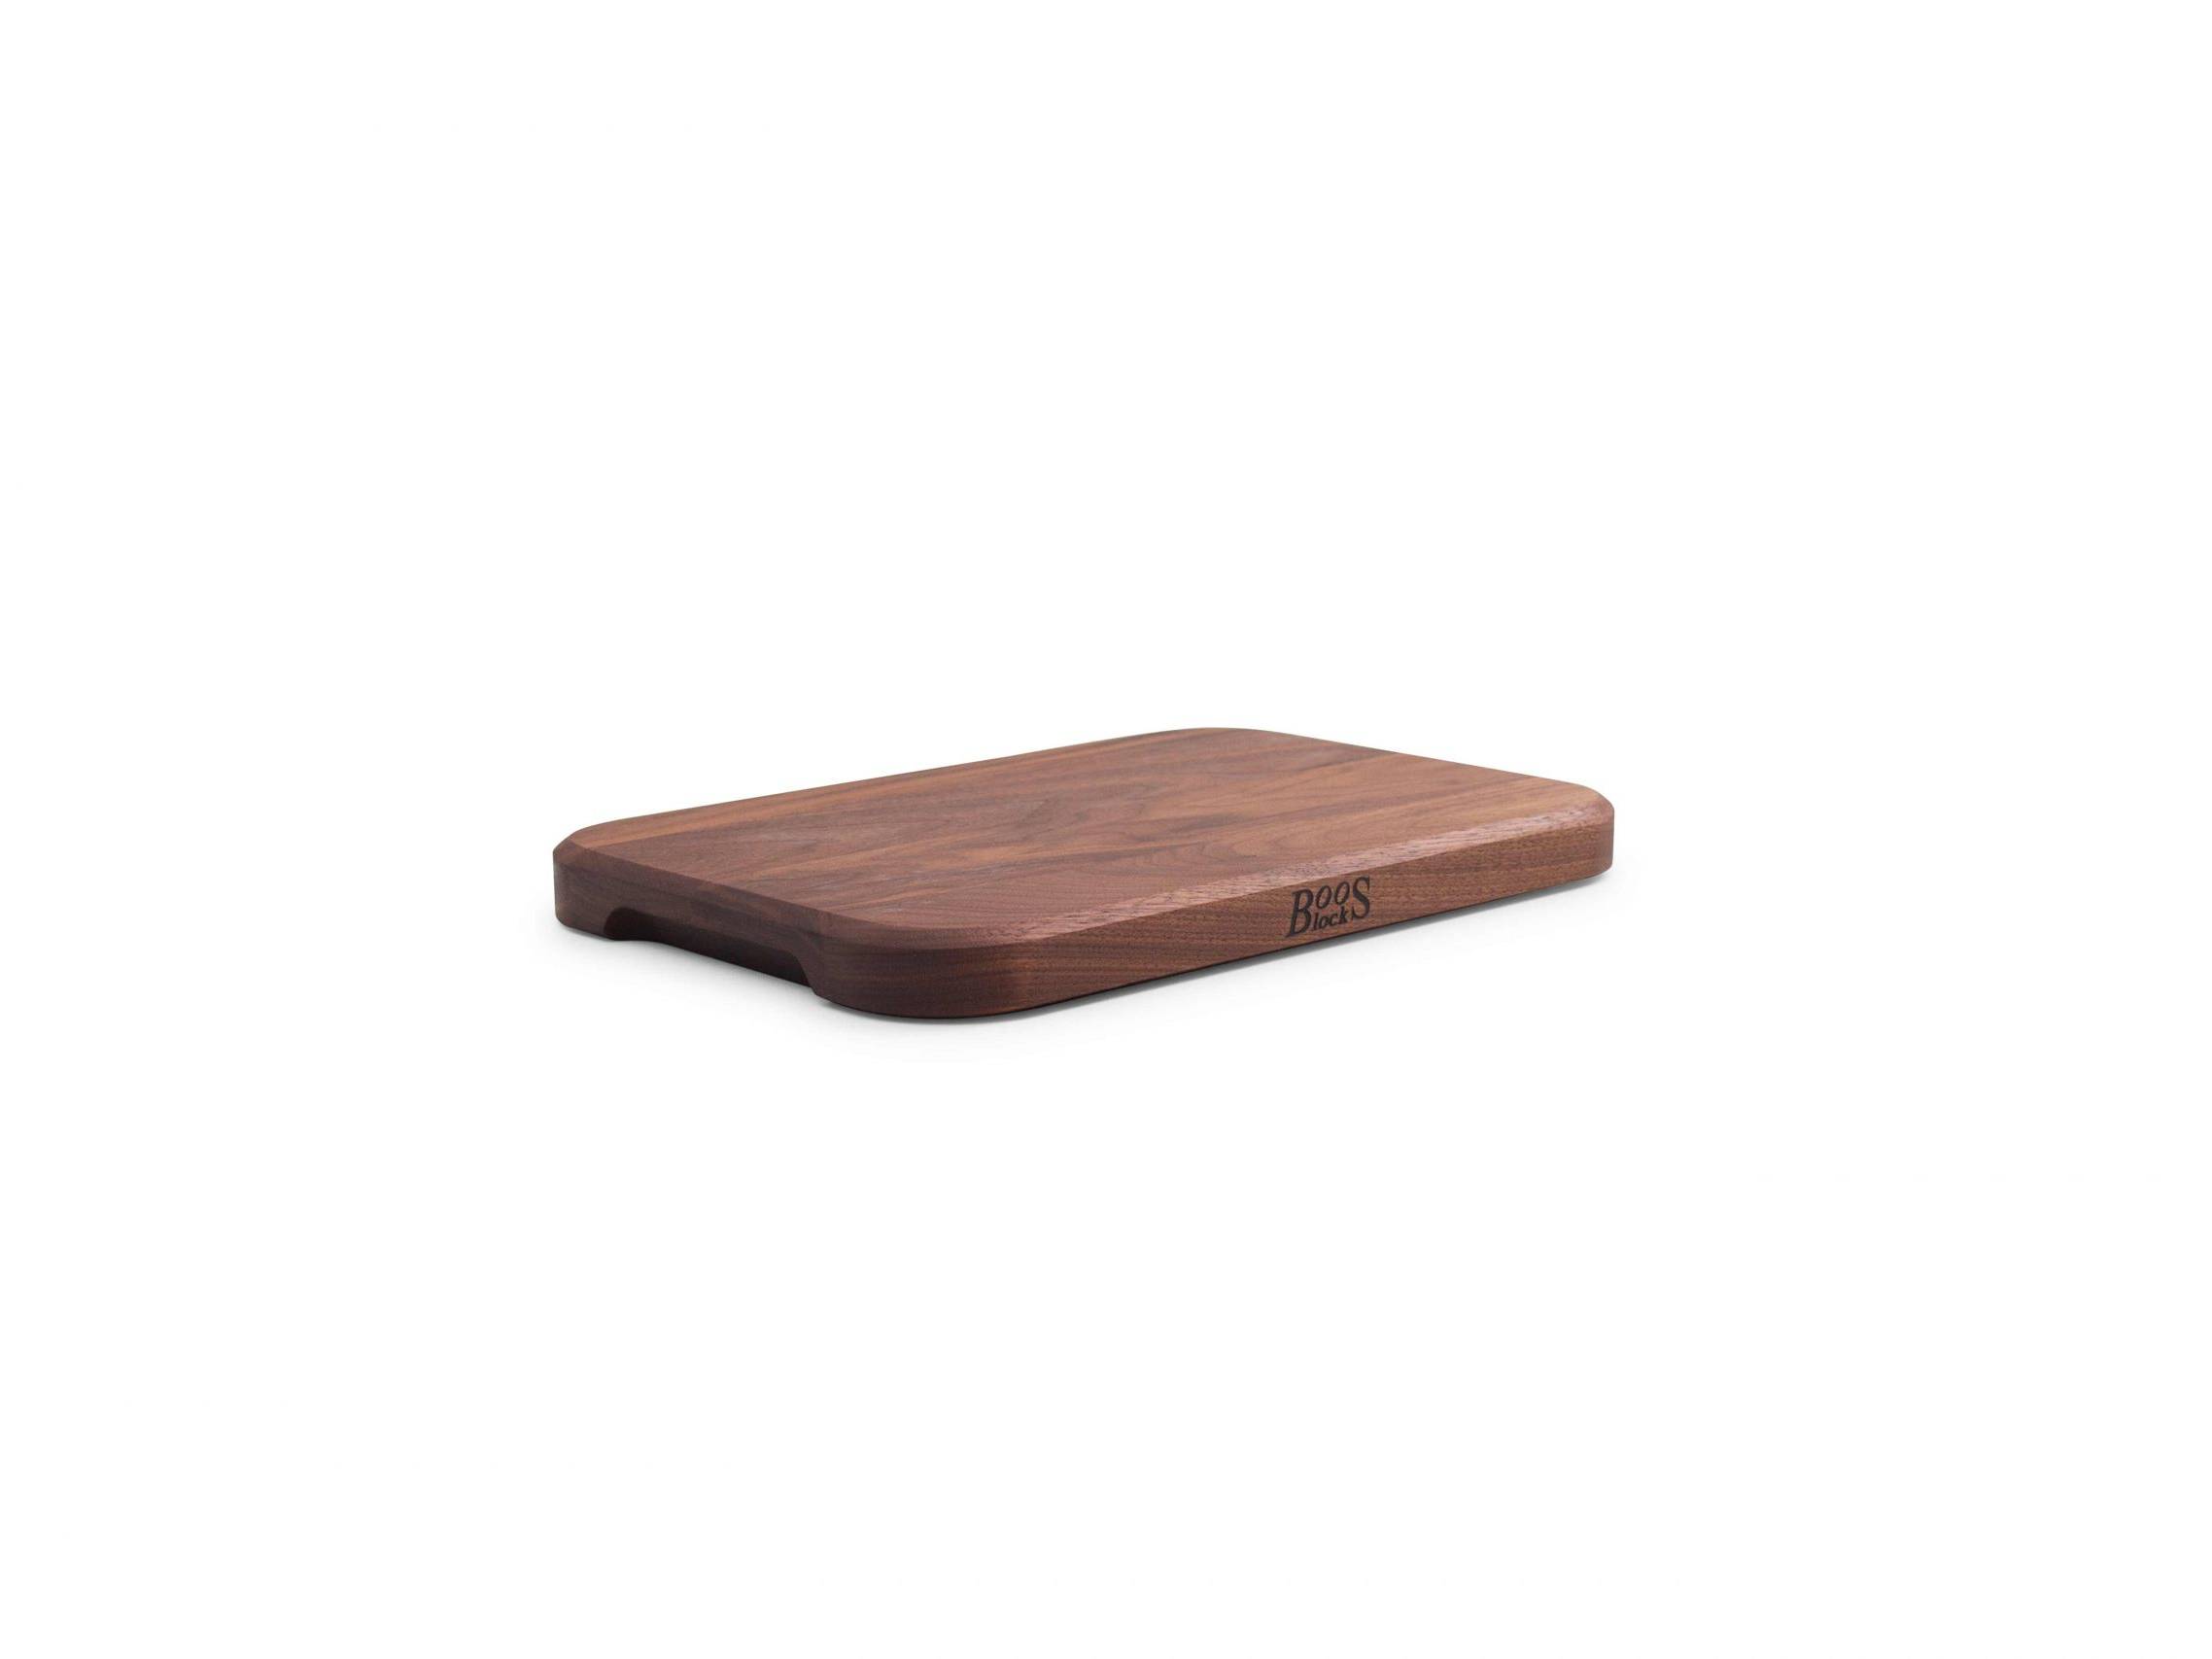 Chop-N-Serve Black Walnut chopping board with recessed grip; can be used on both sides 27